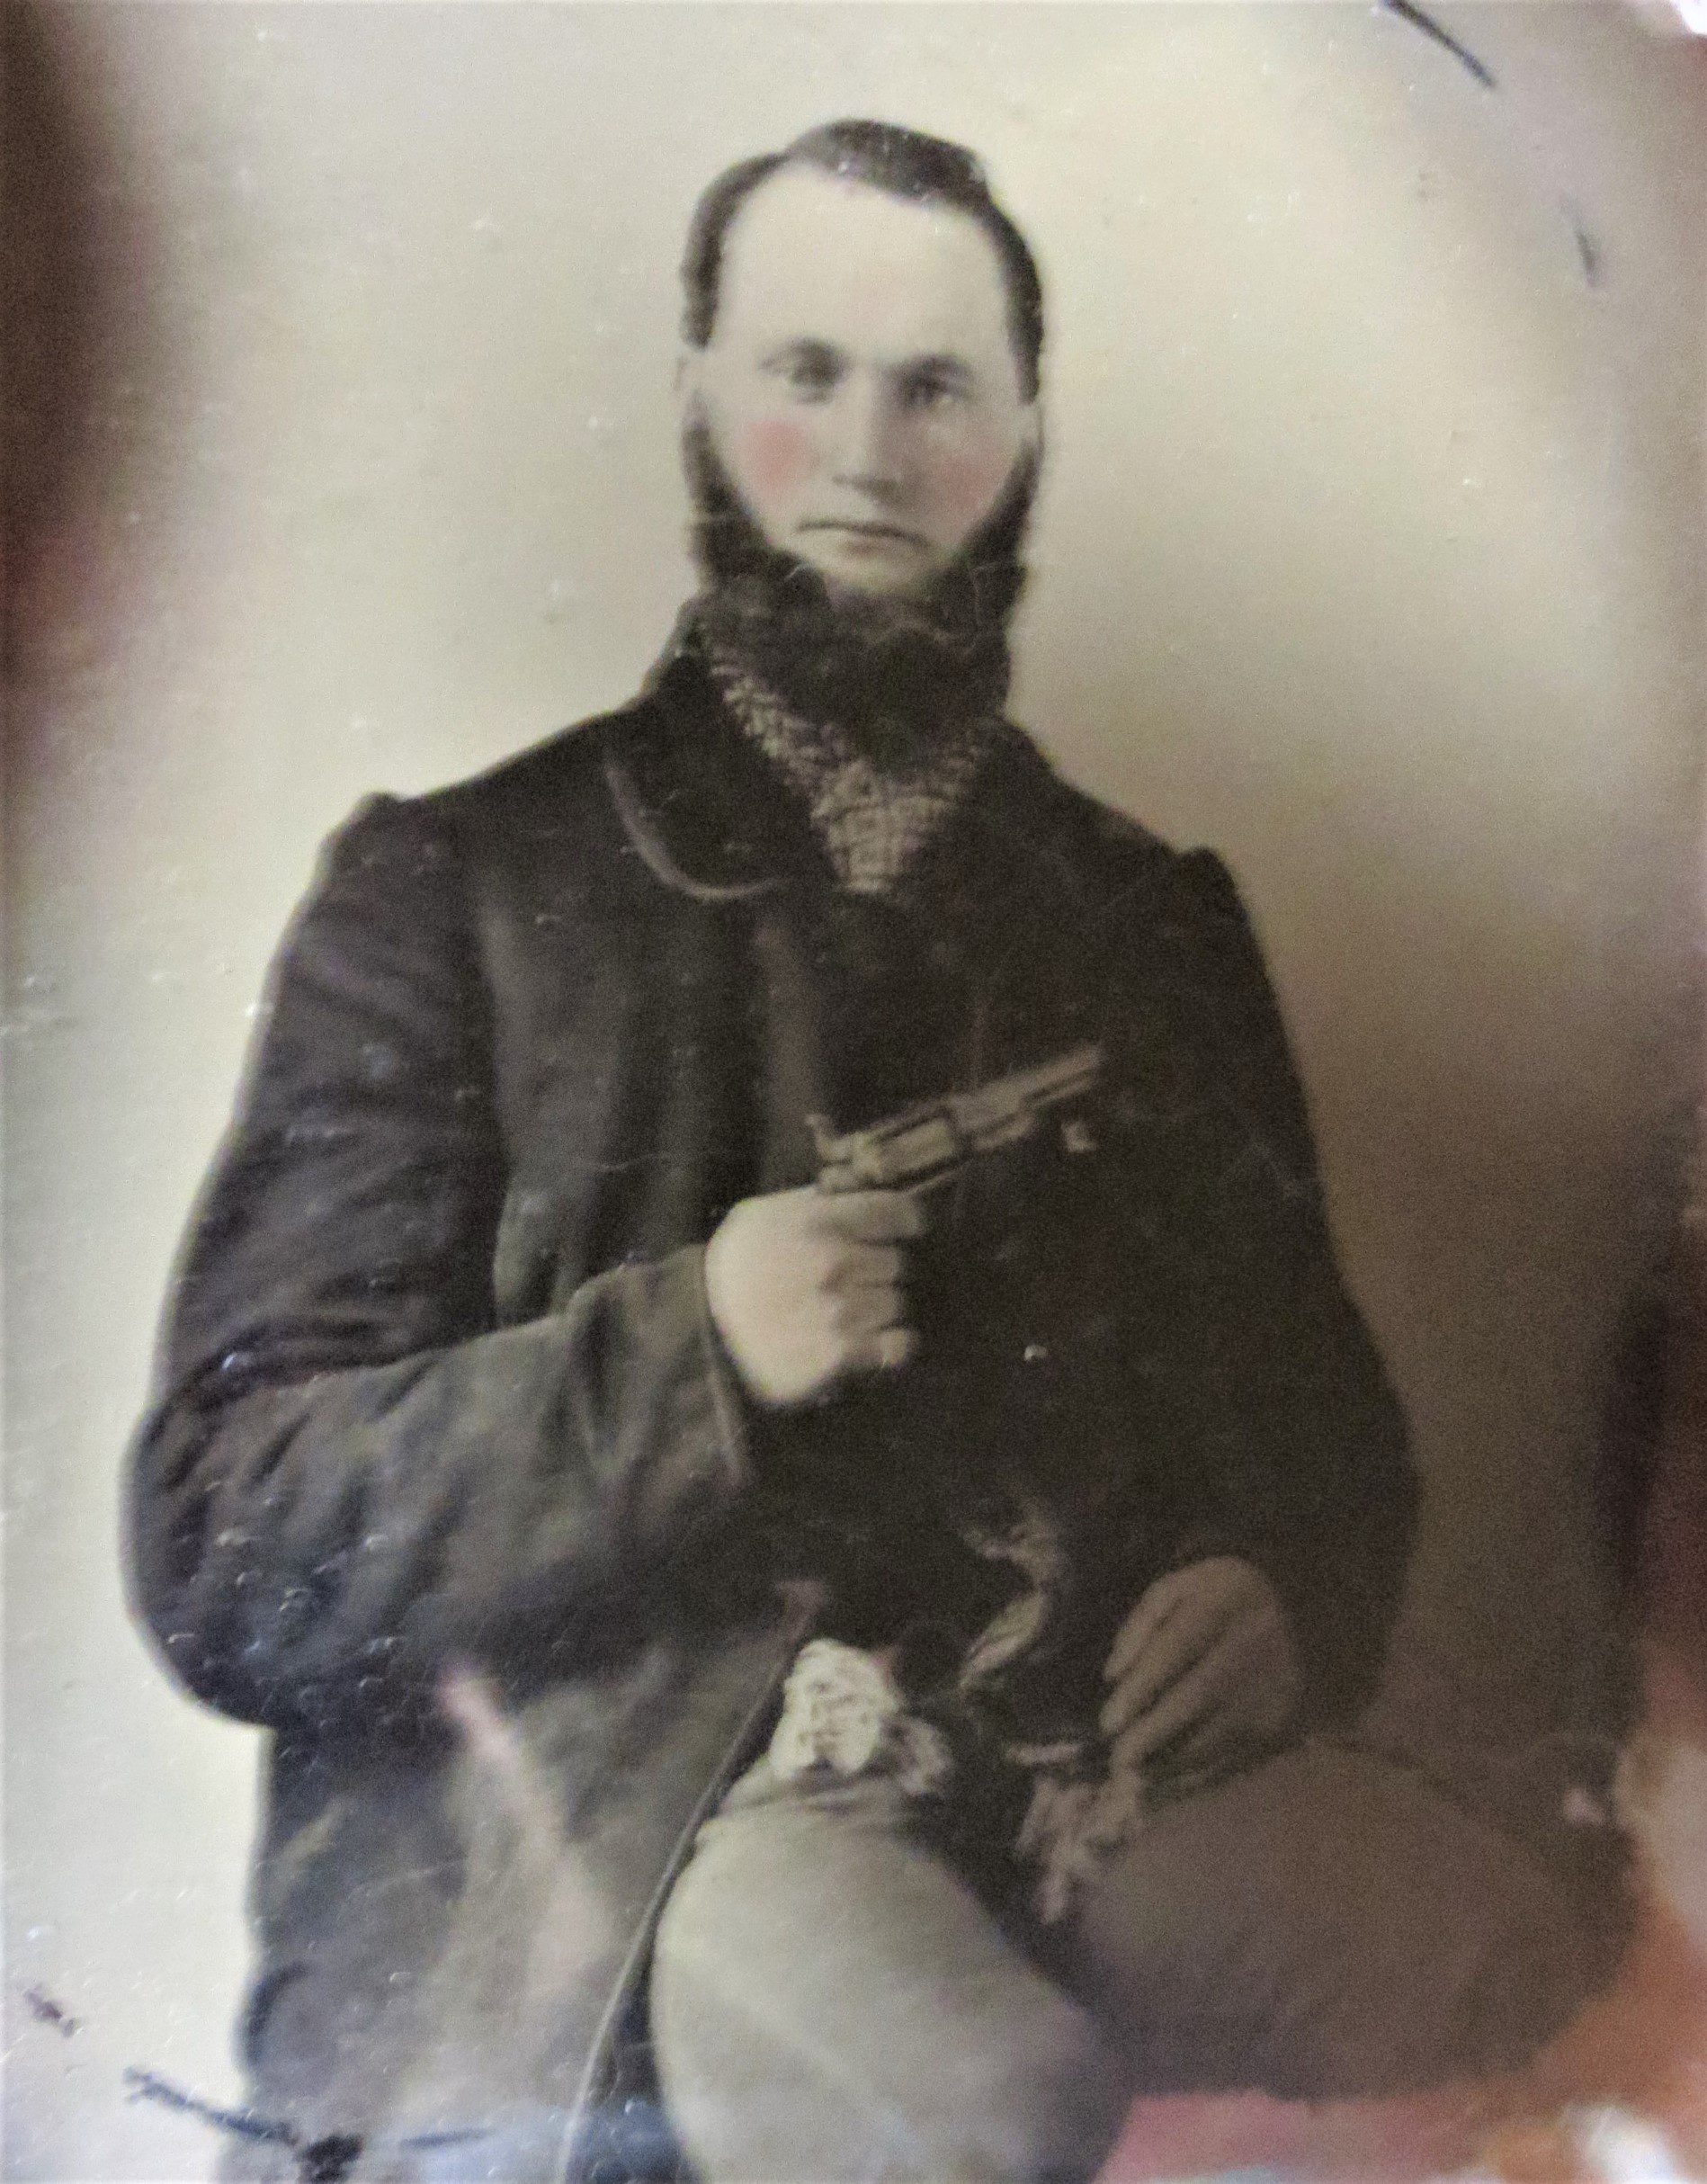 Old picture of a man holding a gun